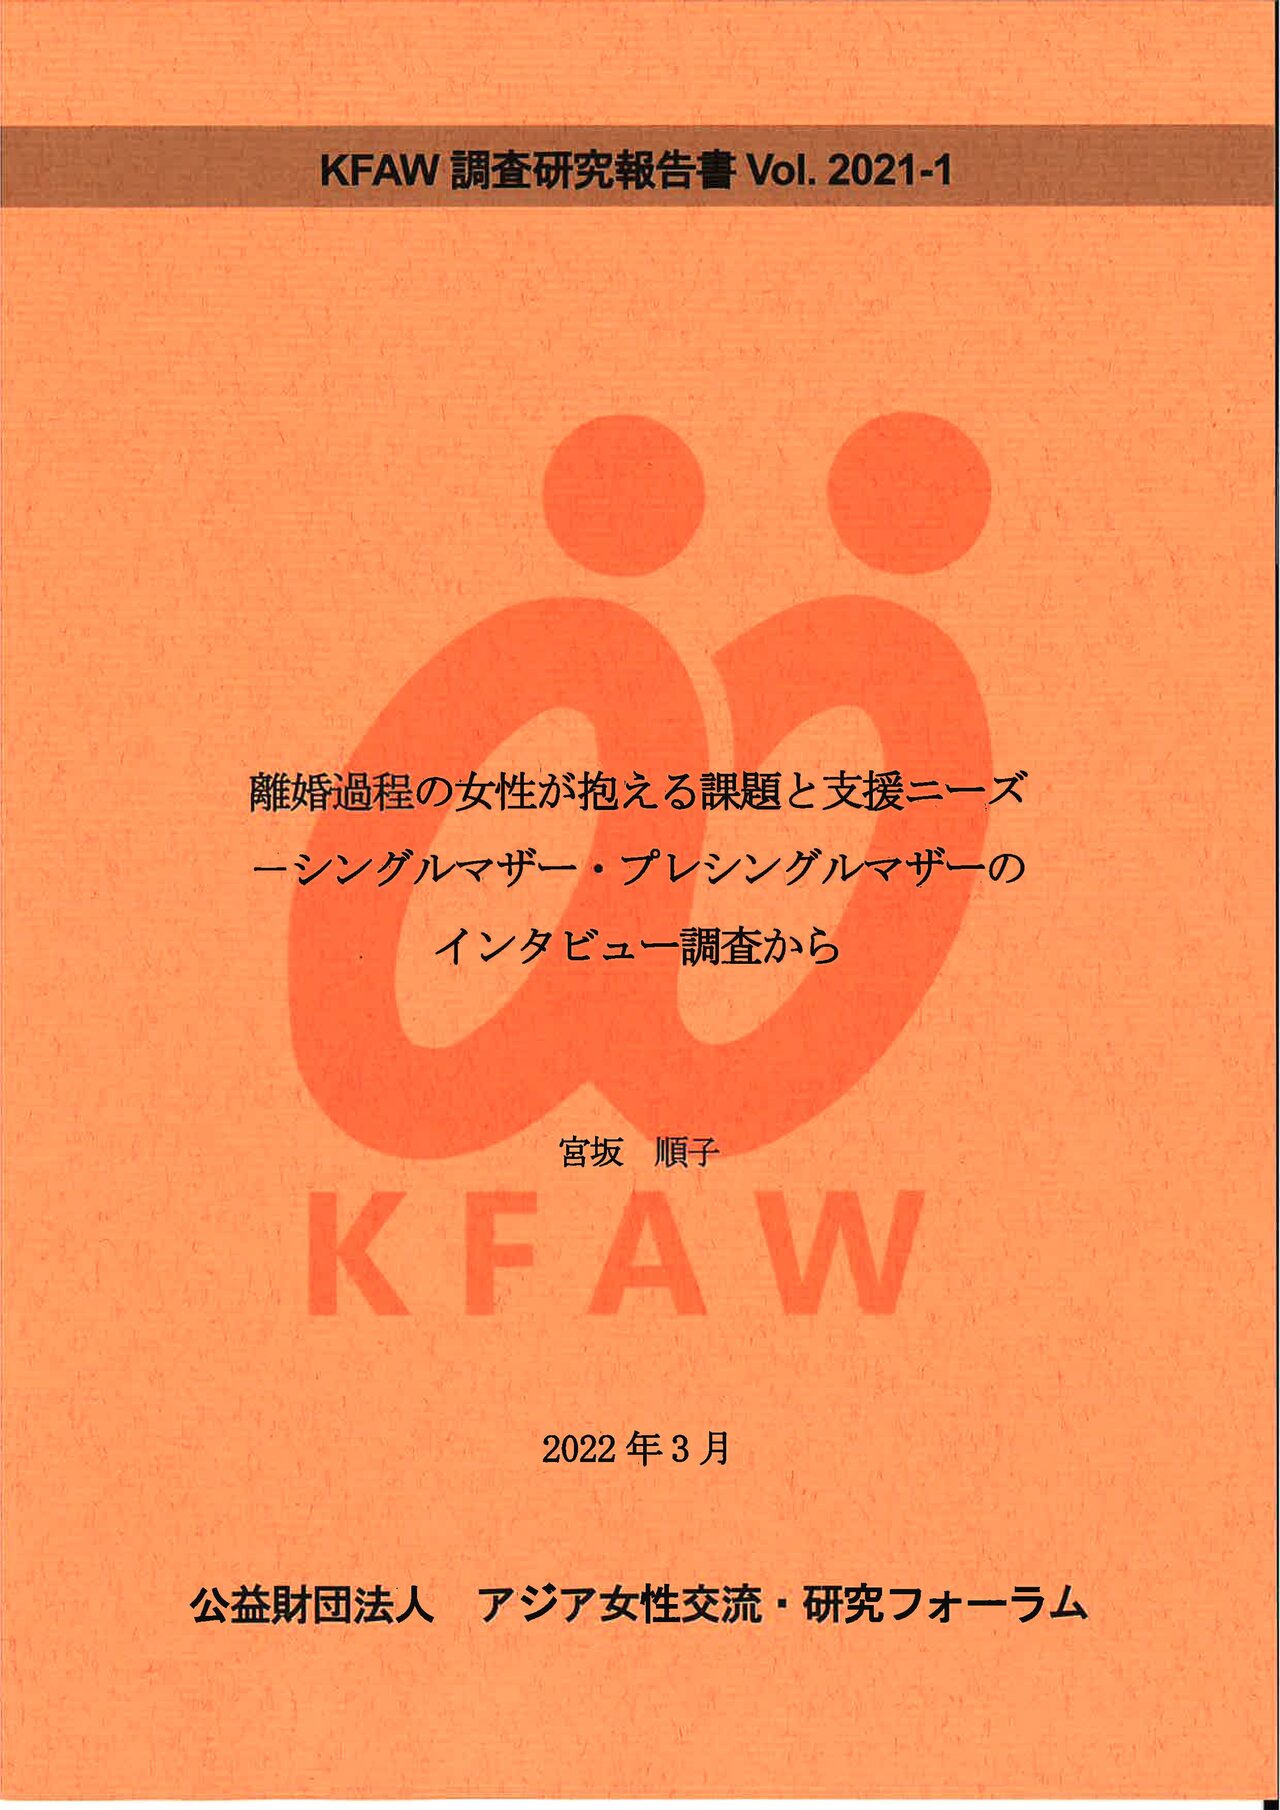 Vol.2021-1 Study on Challenges and Support Needs  of Women in the Process of Divorce(Japanese)(2022,March)